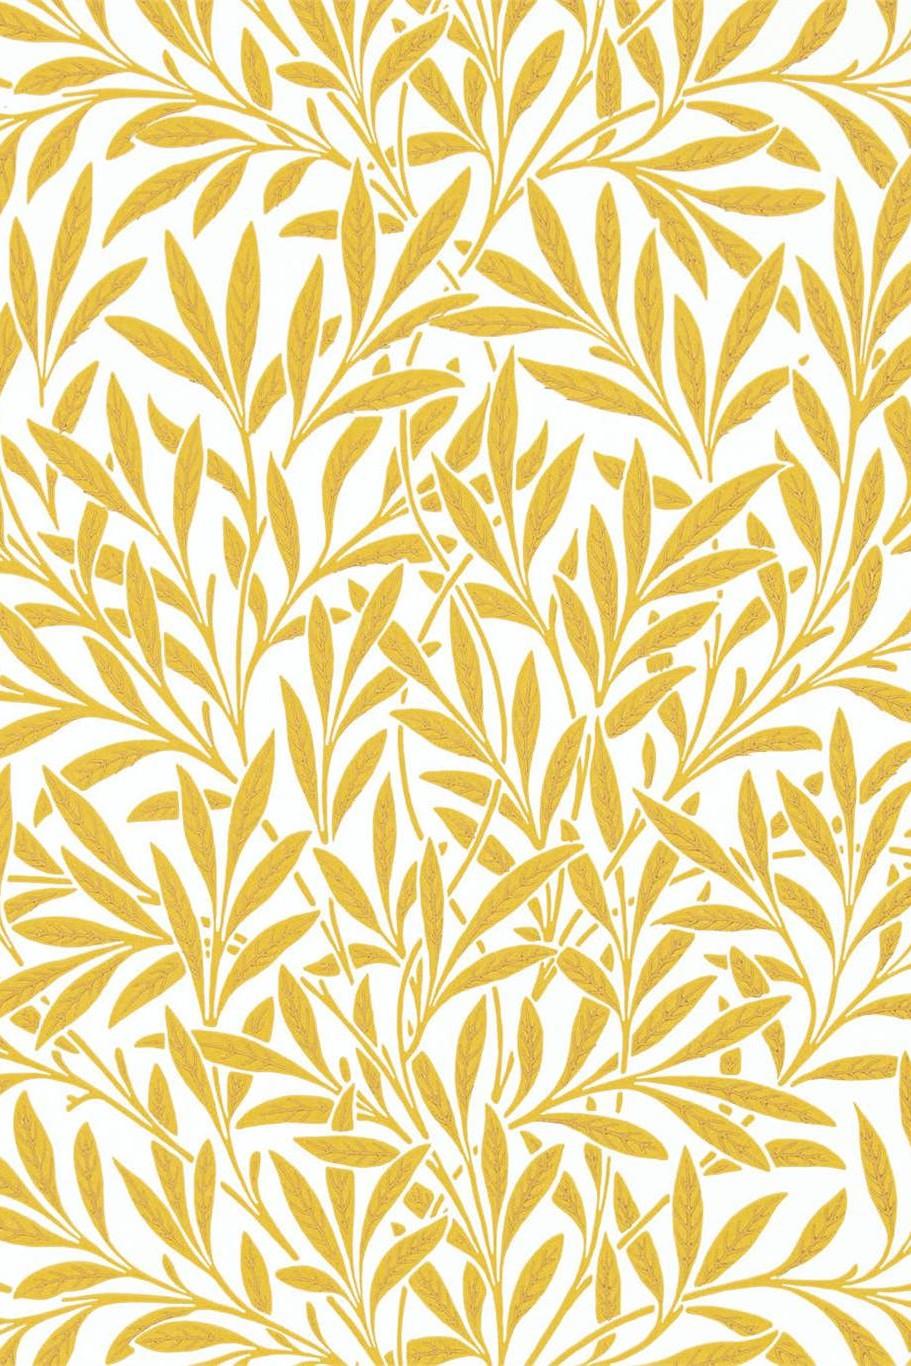 Morris & Co Queen Square Willow Wallpaper DBPW216963